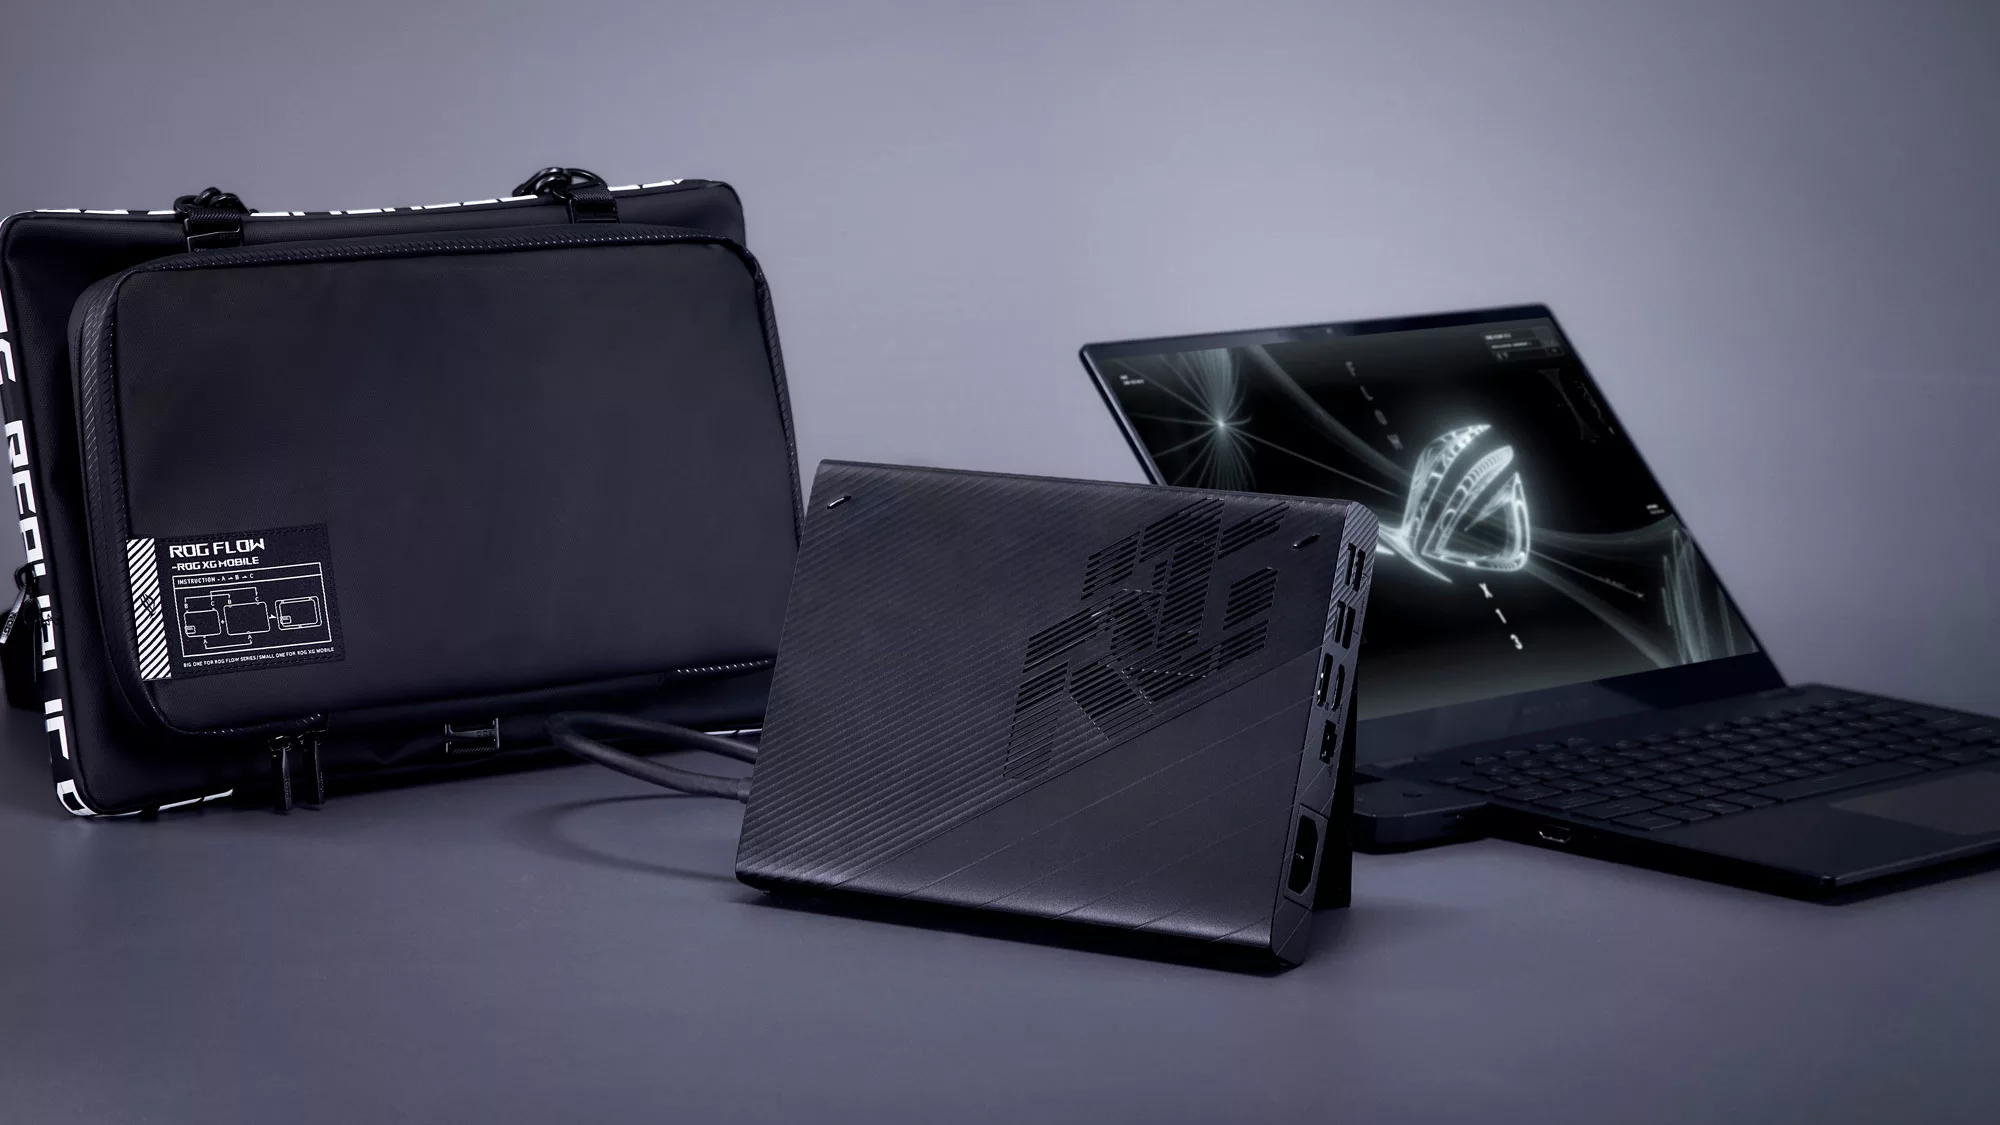 A photo of the Flow X13 laptop sitting next to an XG Mobile and Flow-branded laptop bag.